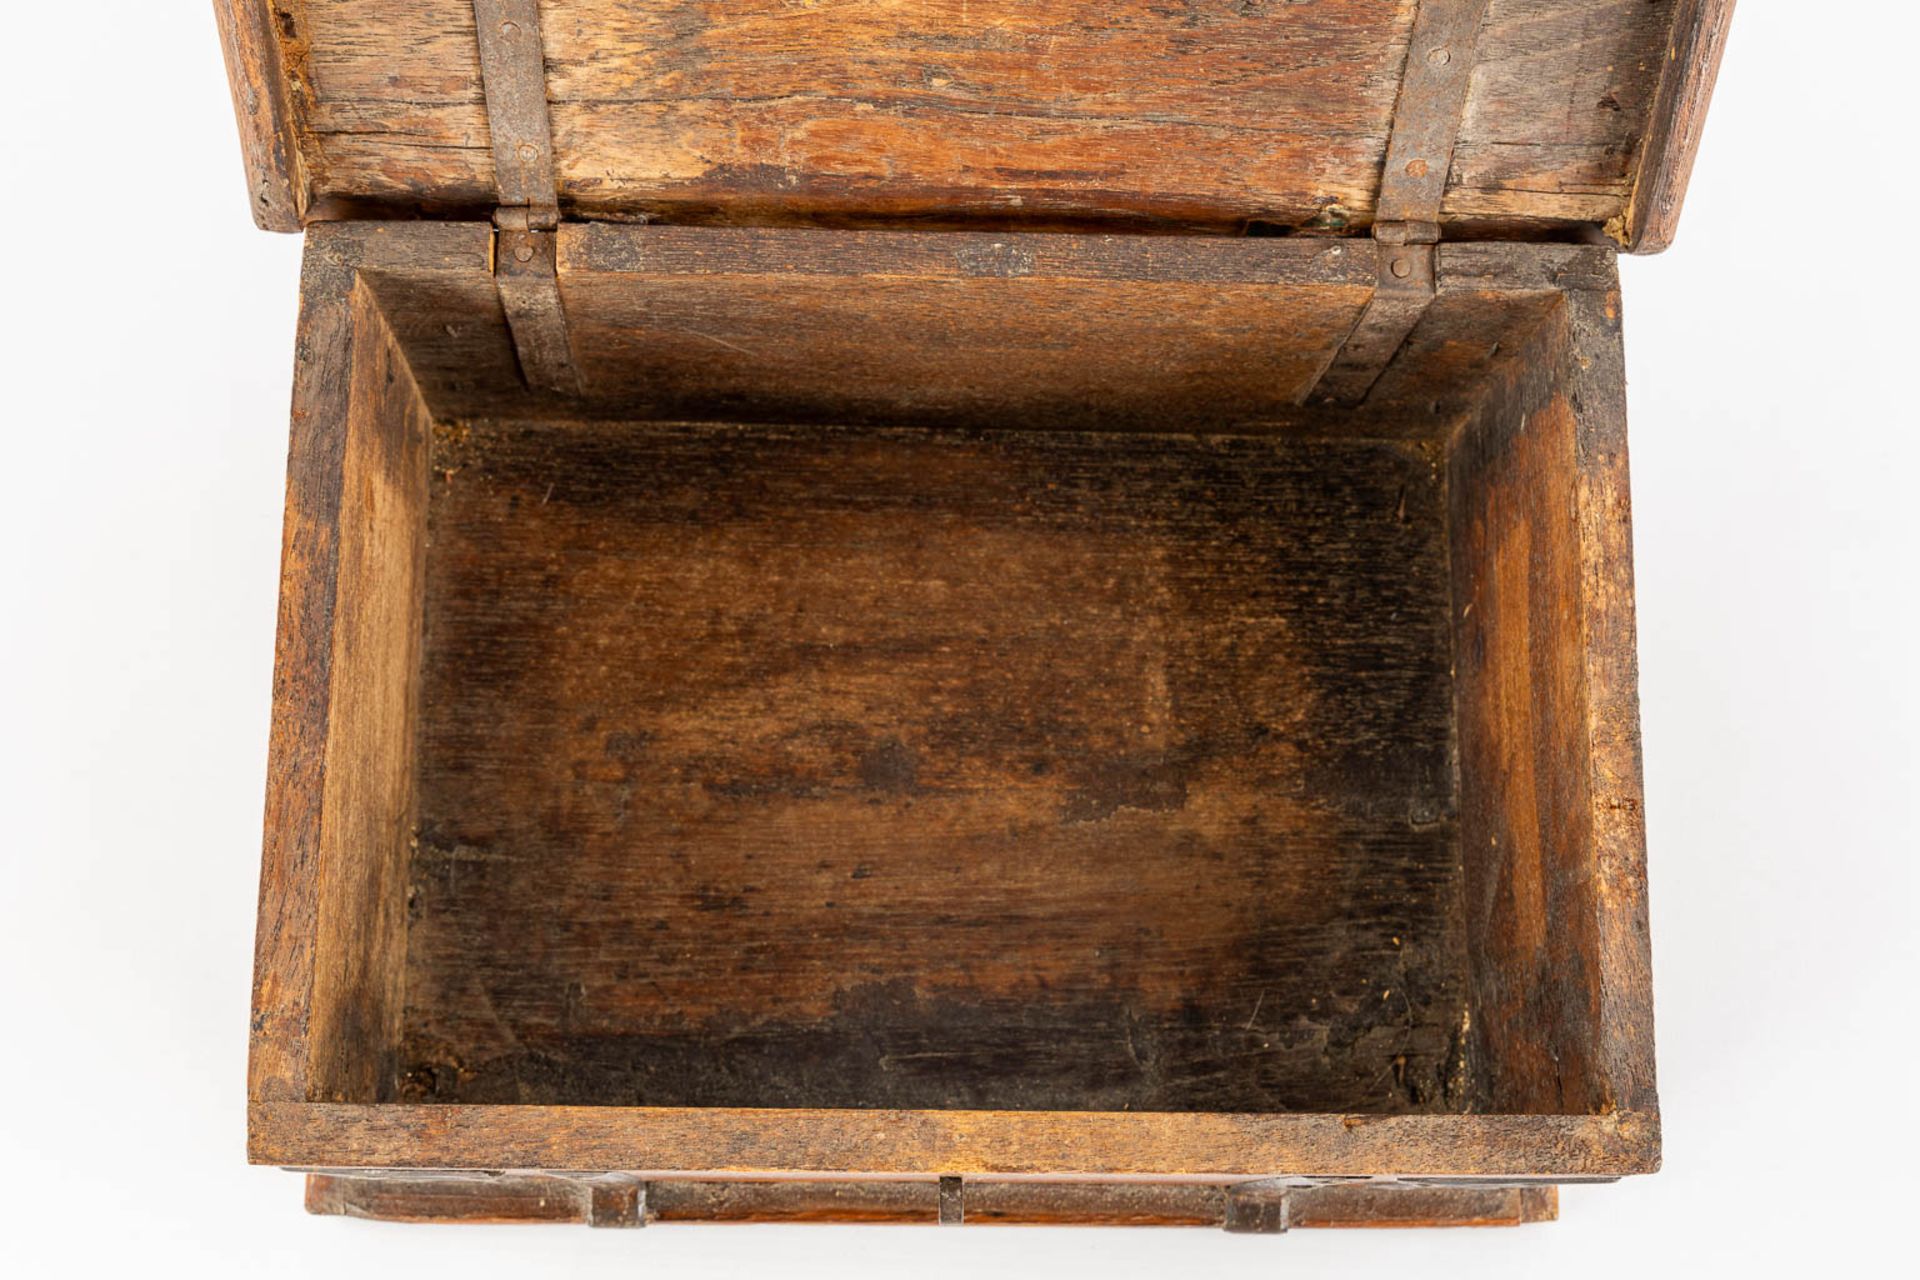 An antique money box or storage chest, oak and wrought iron, 19th C. (L:23 x W:31 x H:13 cm) - Image 10 of 13